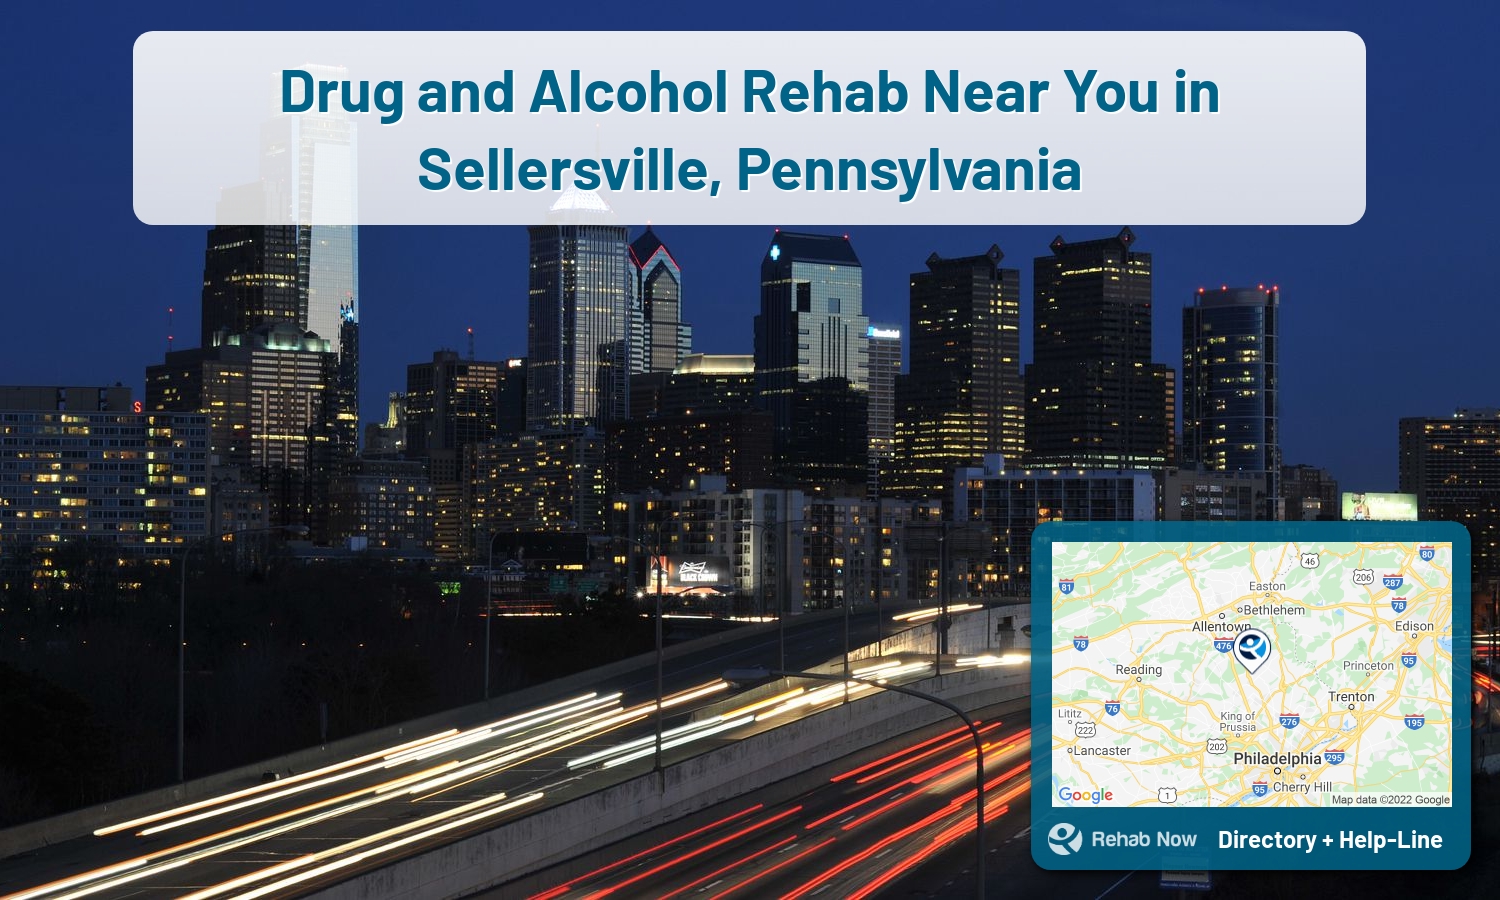 View options, availability, treatment methods, and more, for drug rehab and alcohol treatment in Sellersville, Pennsylvania